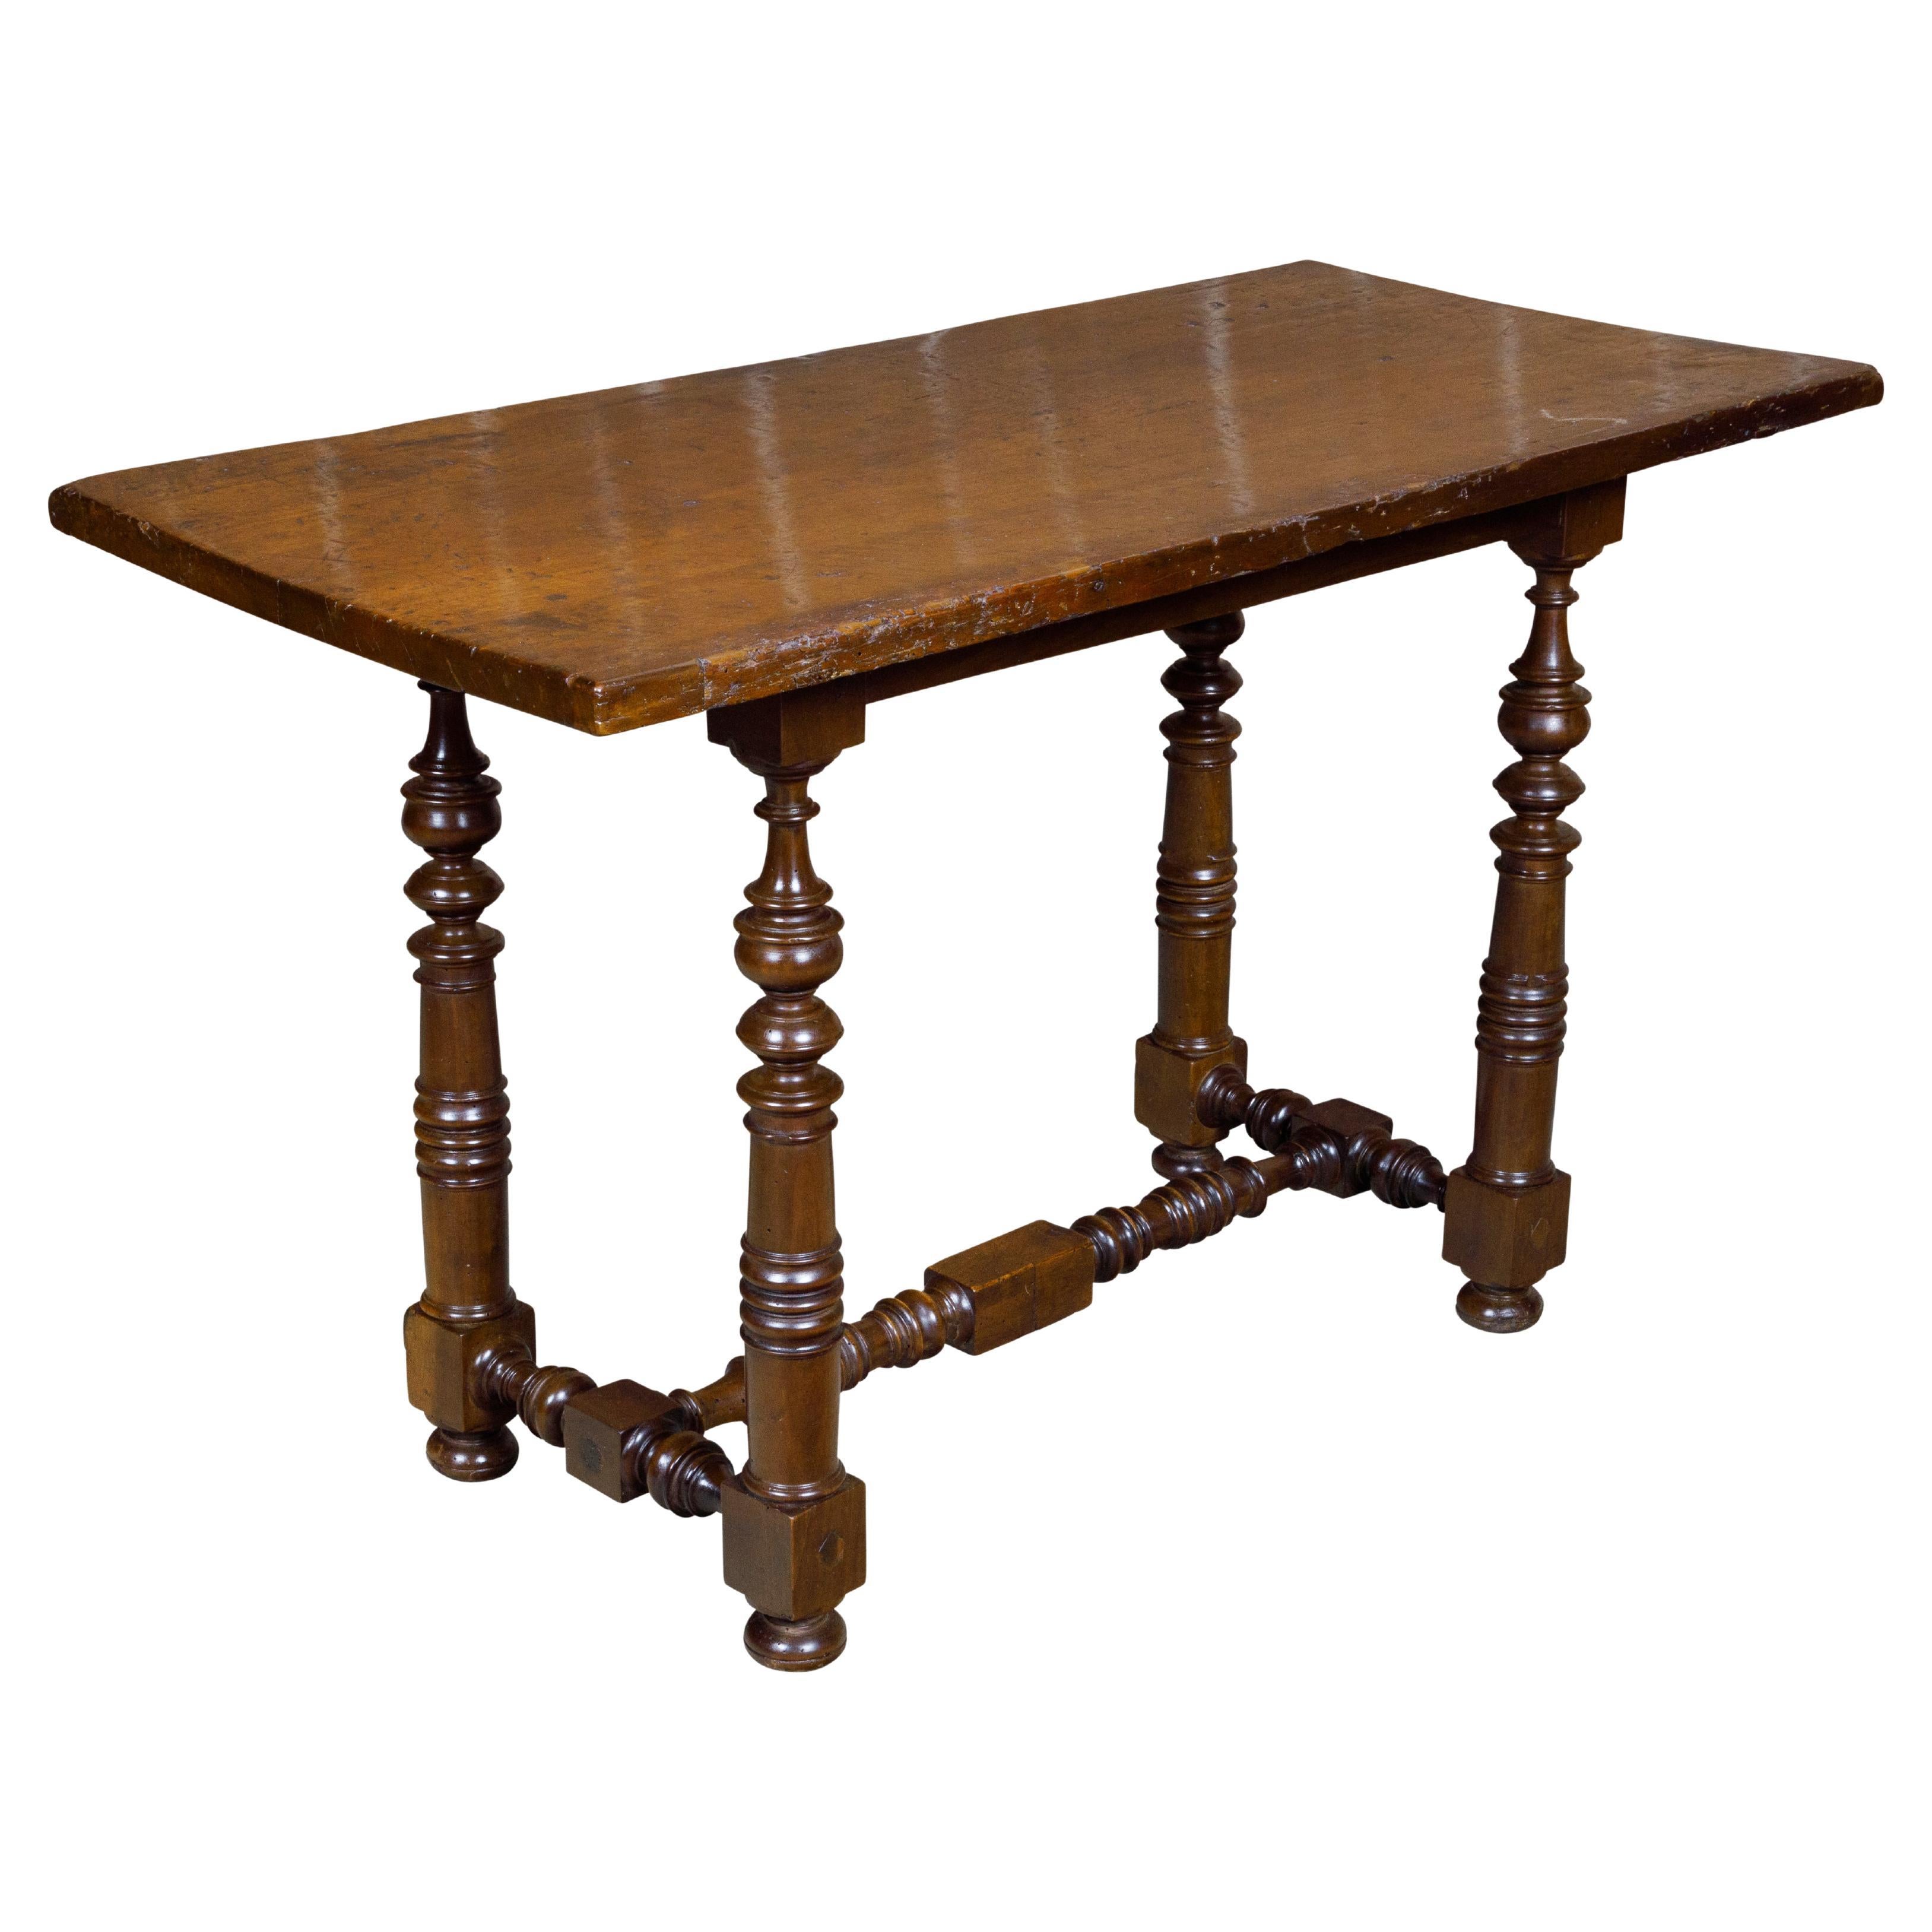 Italian 1800s Walnut Baroque Style Spool Table with H-Form Cross Stretcher For Sale